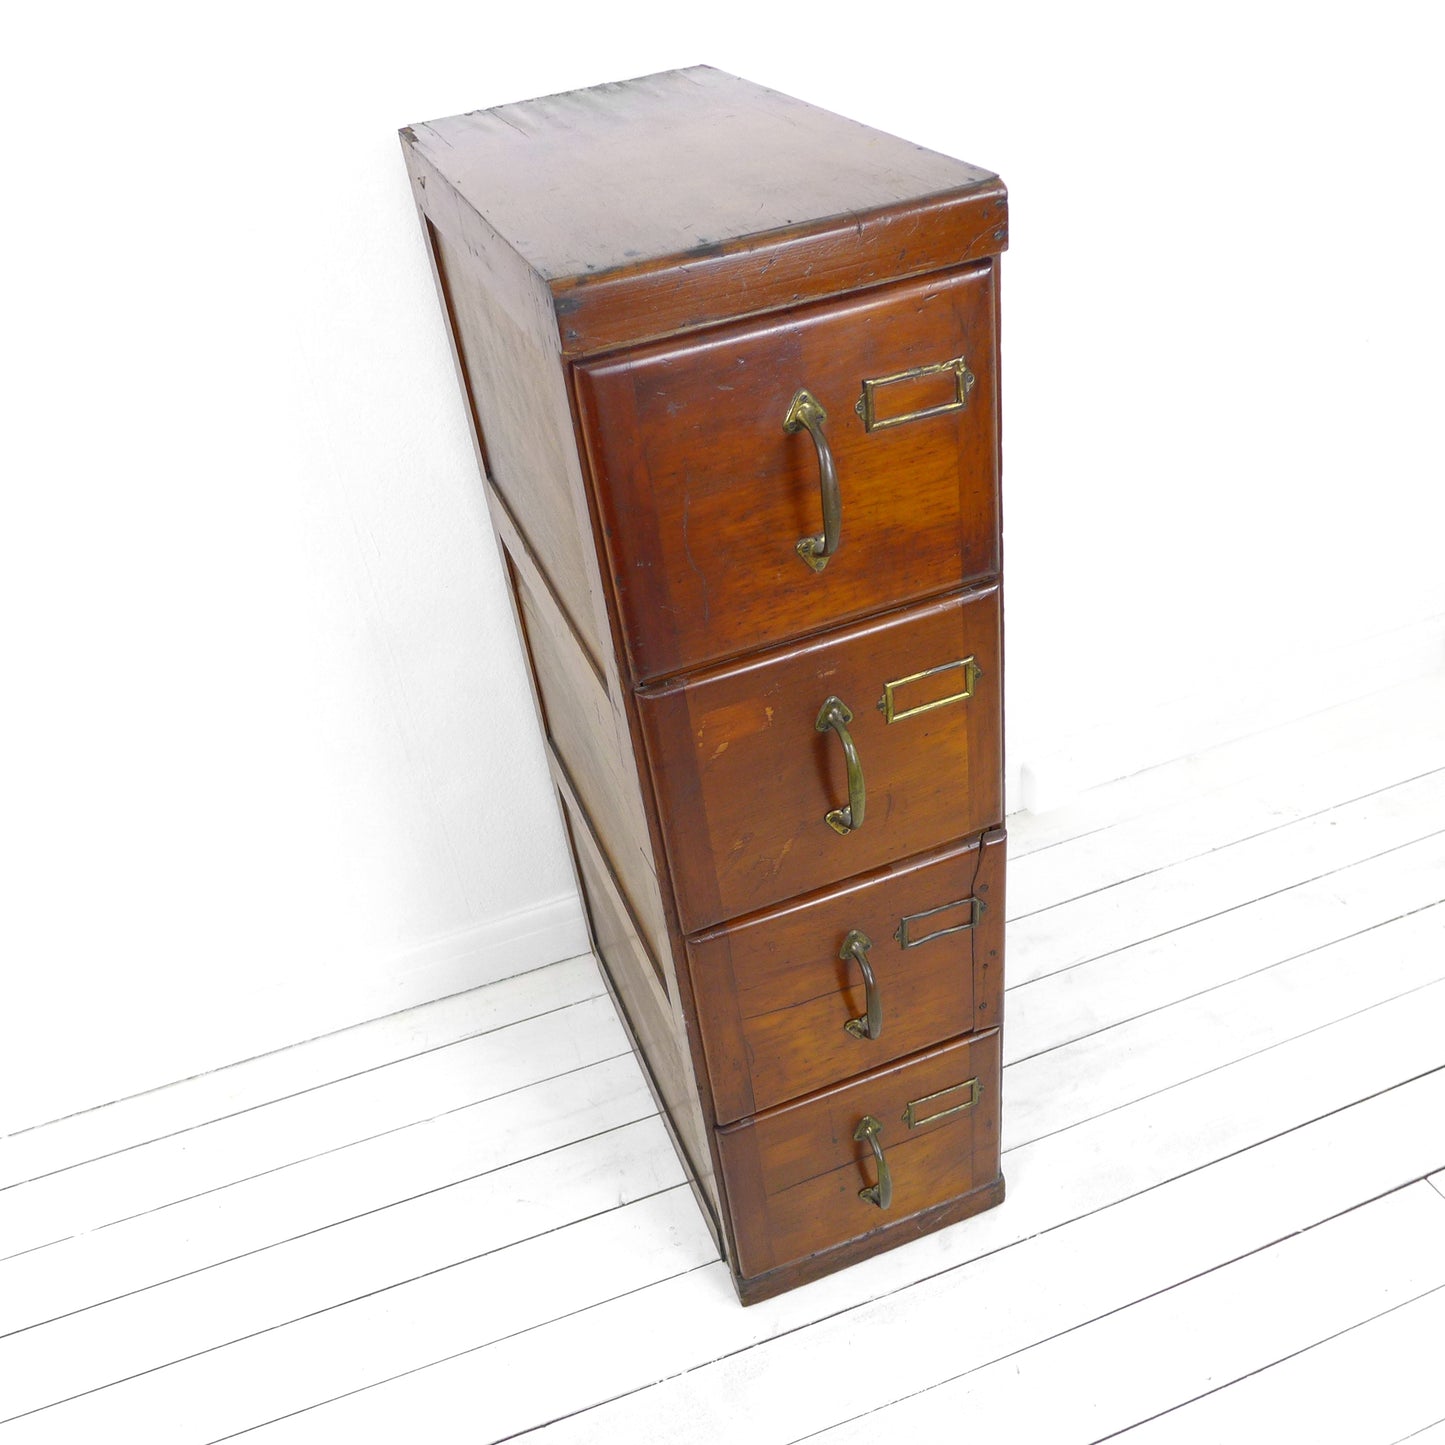 Vintage Industrial Wooden 3 Drawer Filing Cabinet / Chest of Drawers